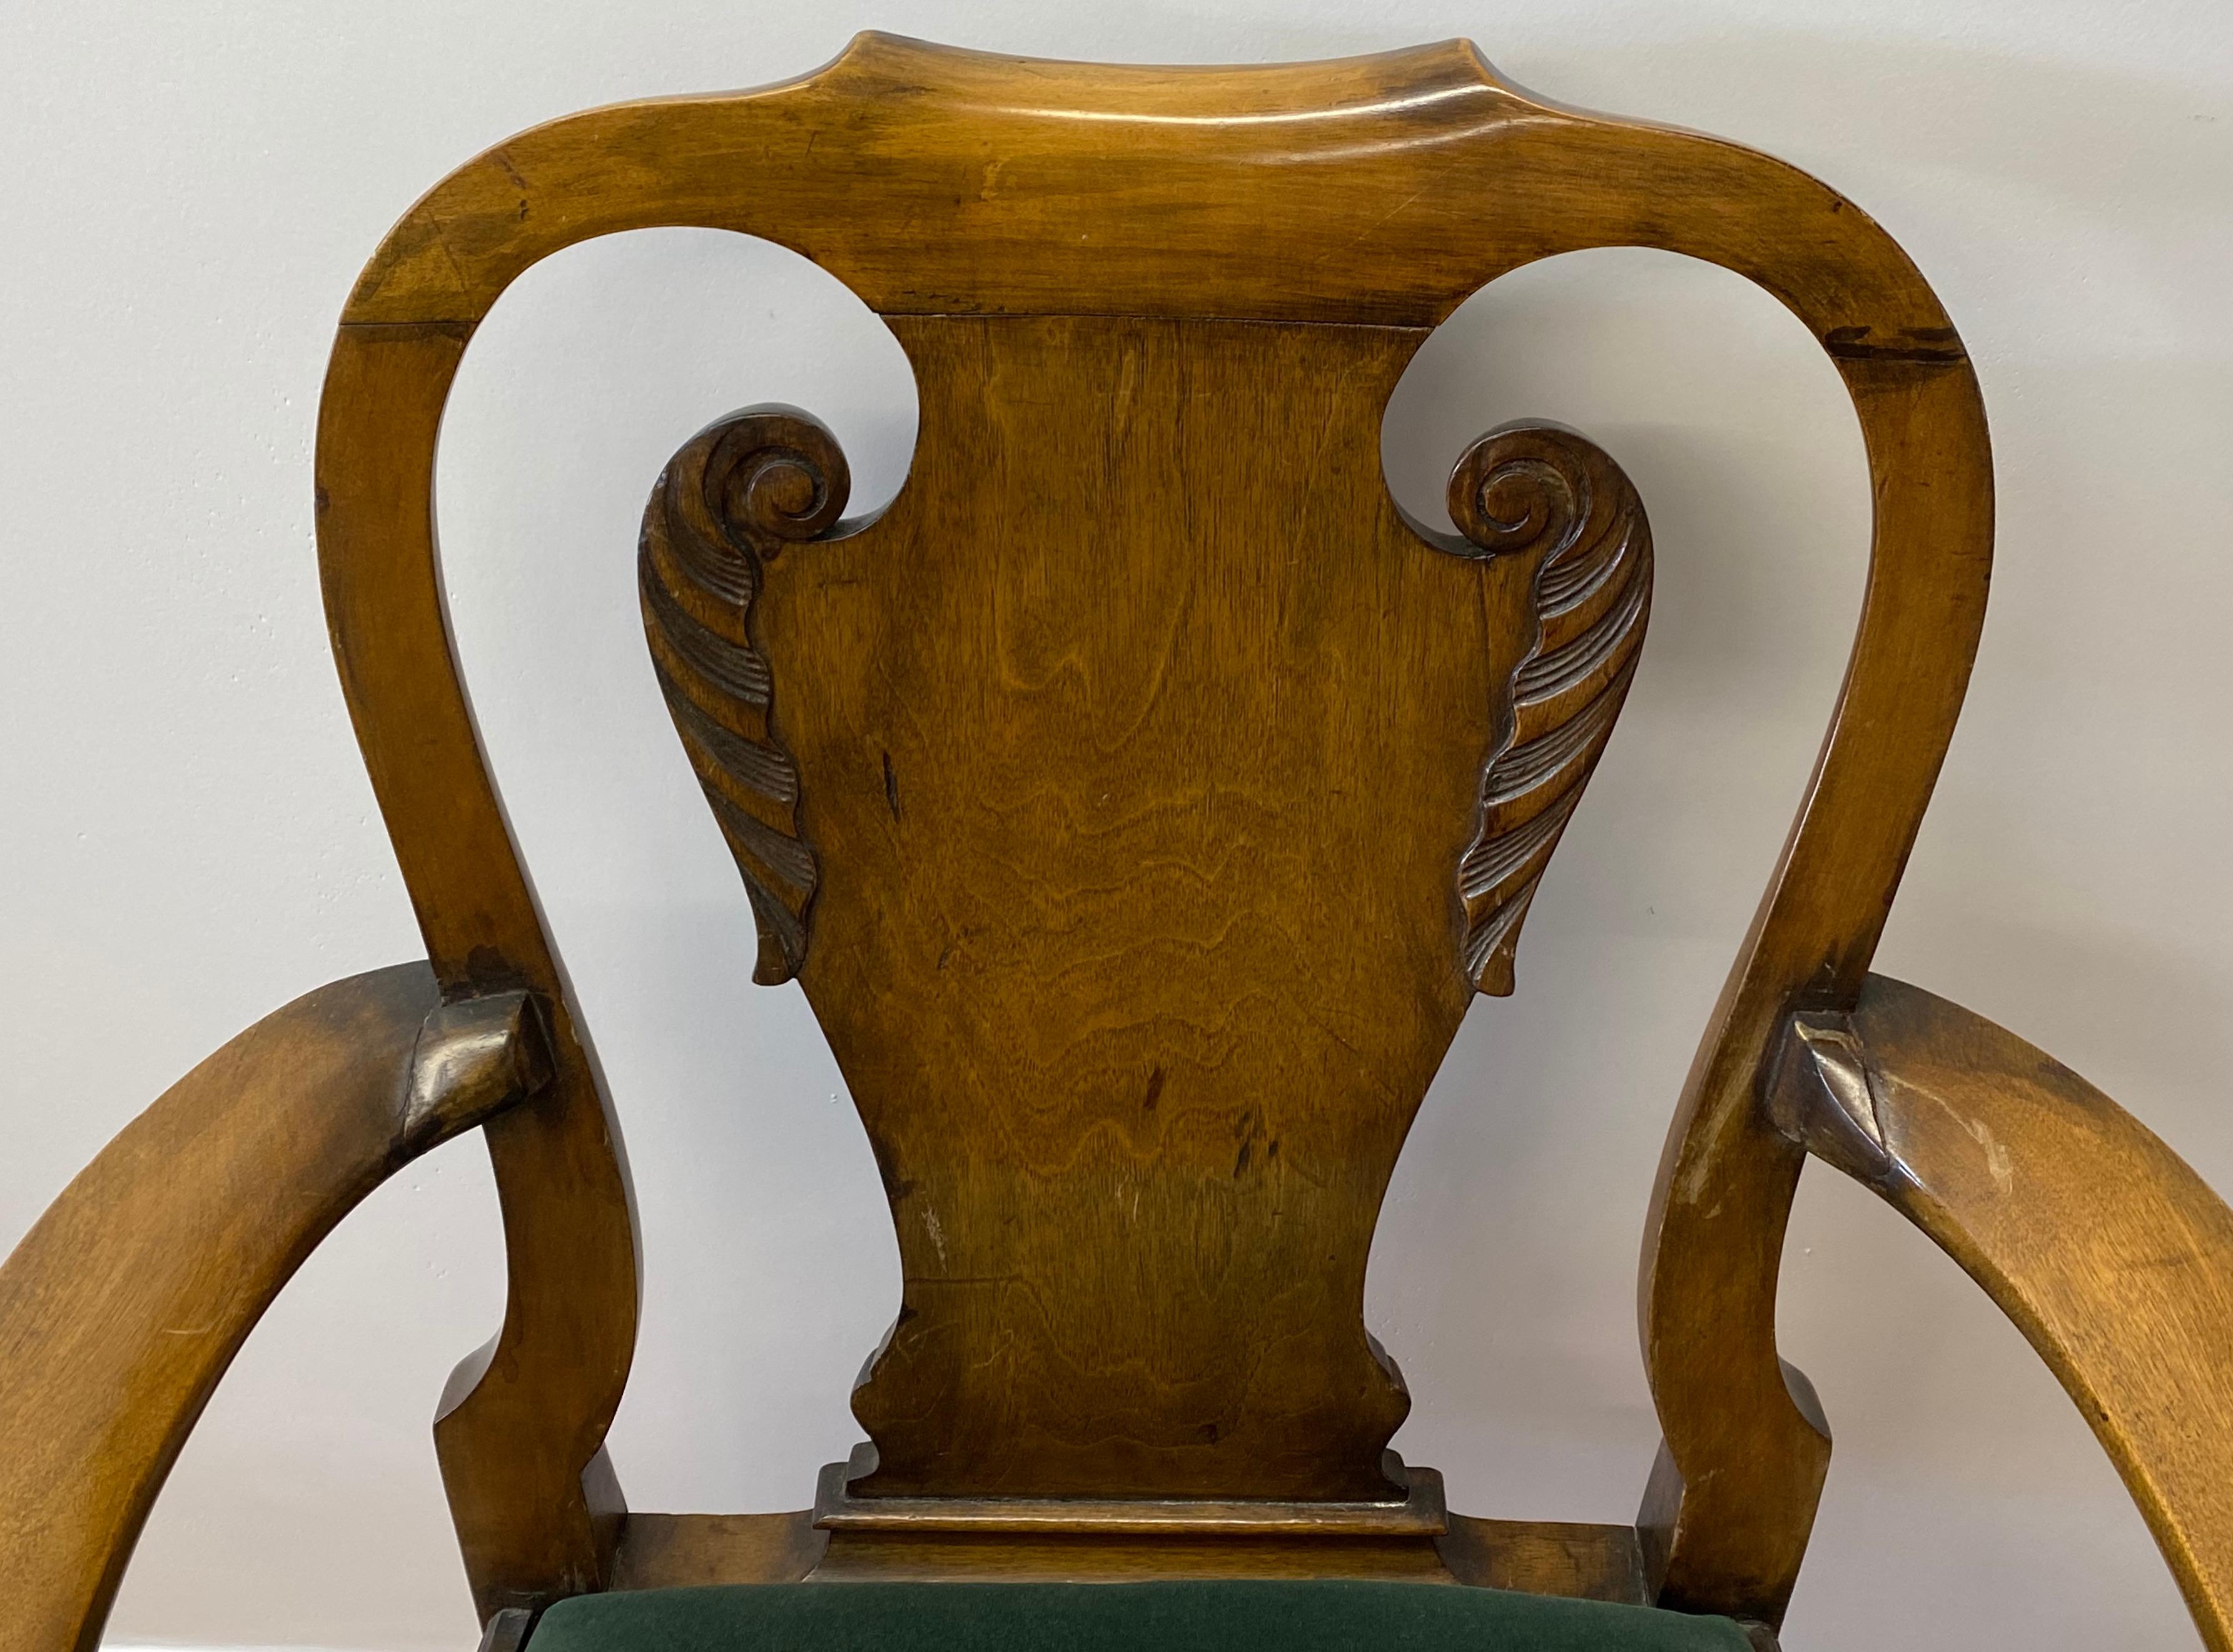 Queen Anne Style carved mahogany armchair, circa 1830

Handsome hand carved mahogany arm chair.

Most likely imported to the United States from England

Measures: 28